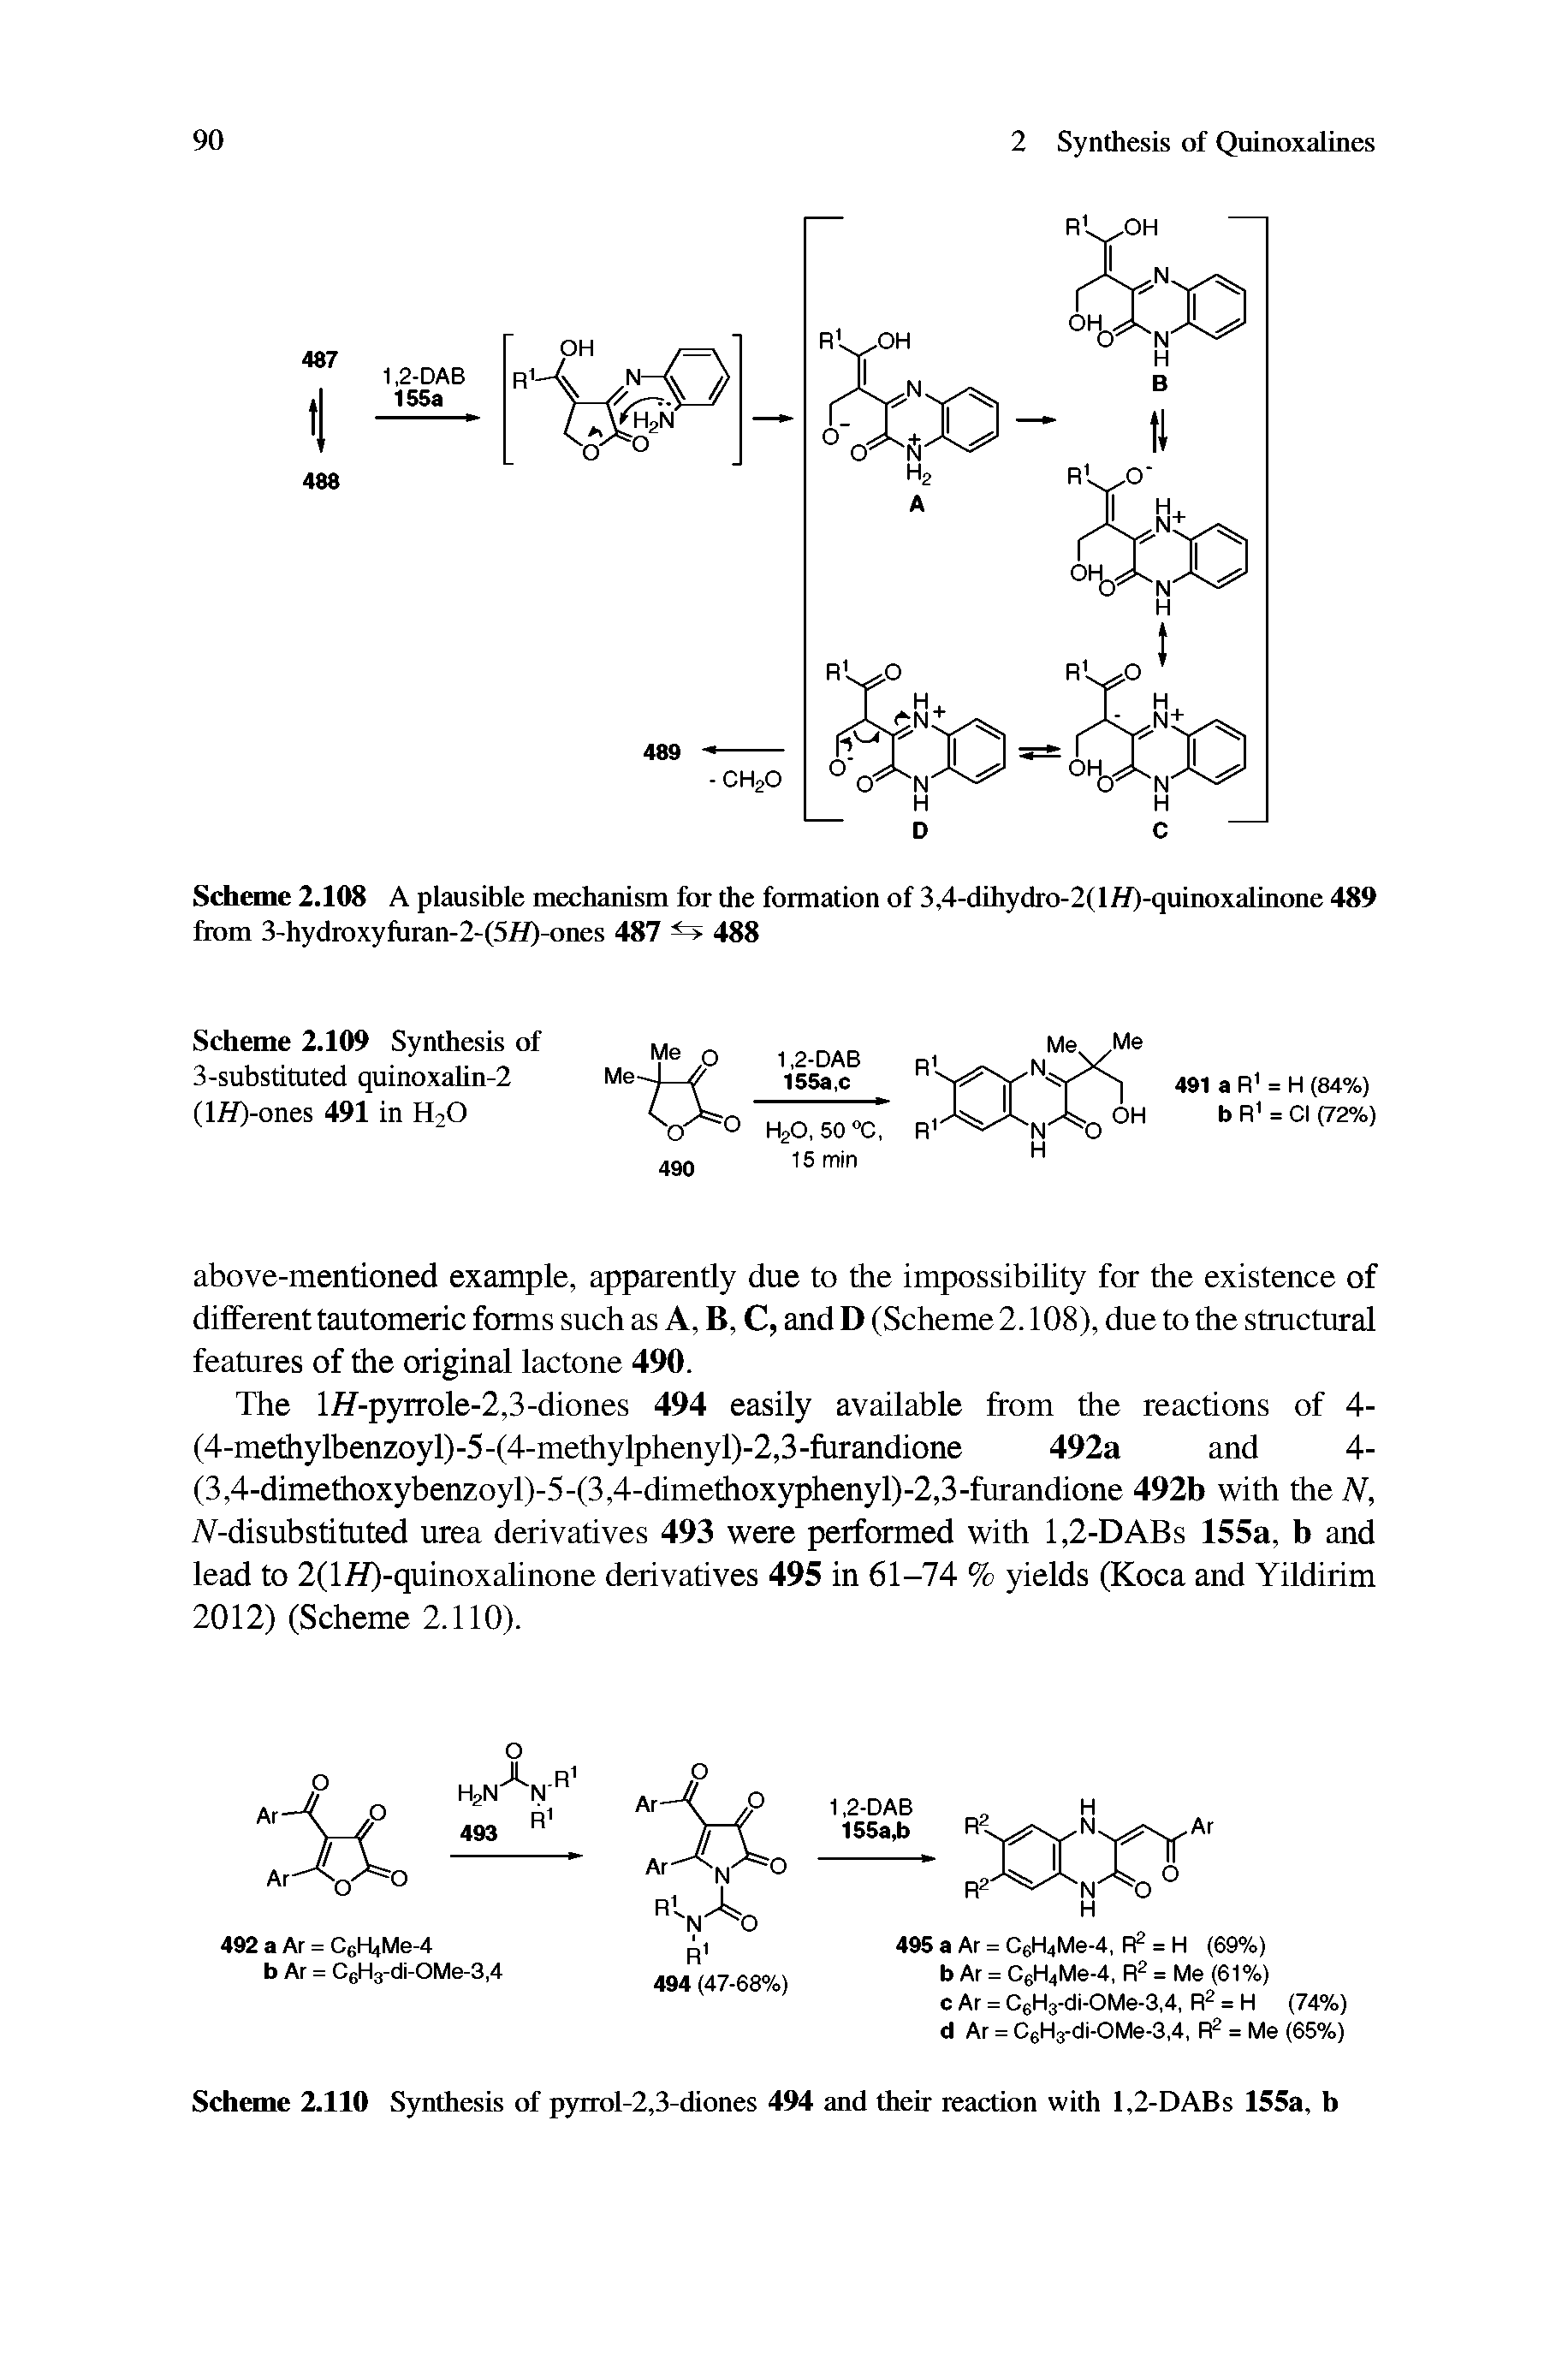 Scheme 2.108 A plausible mechanism for the formation of 3,4-dihydro-2(lff)-quinoxalinone 489 from 3-hydroxyfiiran-2-(5fl)-ones 487 488...